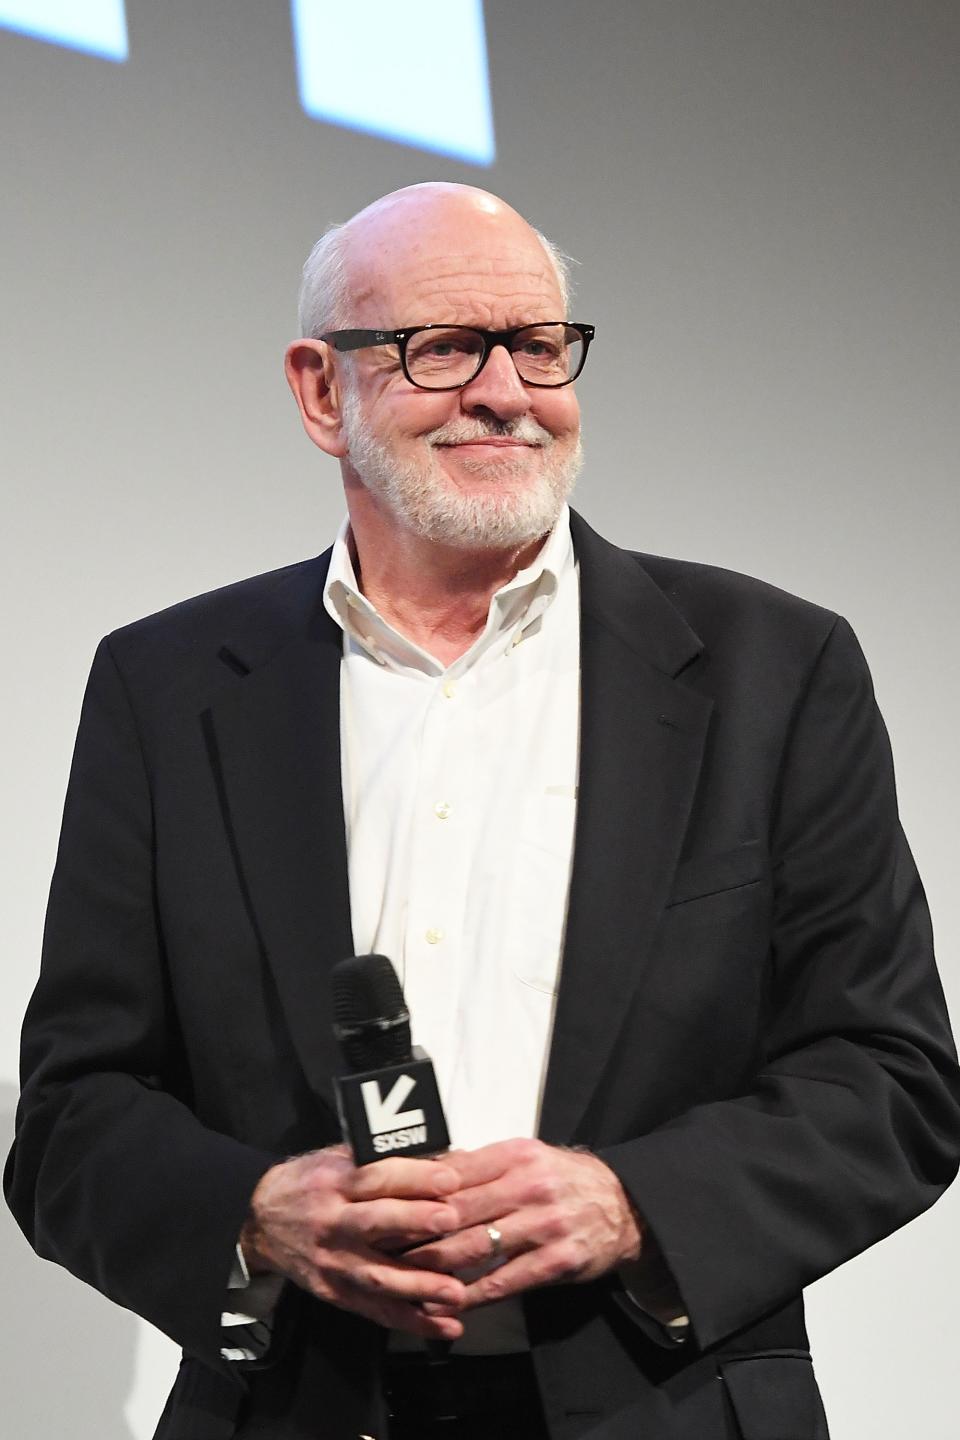 Frank Oz attends the “Muppet Guys Talking: Secrets Behind the Show the Whole World Watched” panel at the 2017 SXSW Conference on March 12, 2017, in Austin, Texas. (Photo: Matt Winkelmeyer/Getty Images for SXSW)